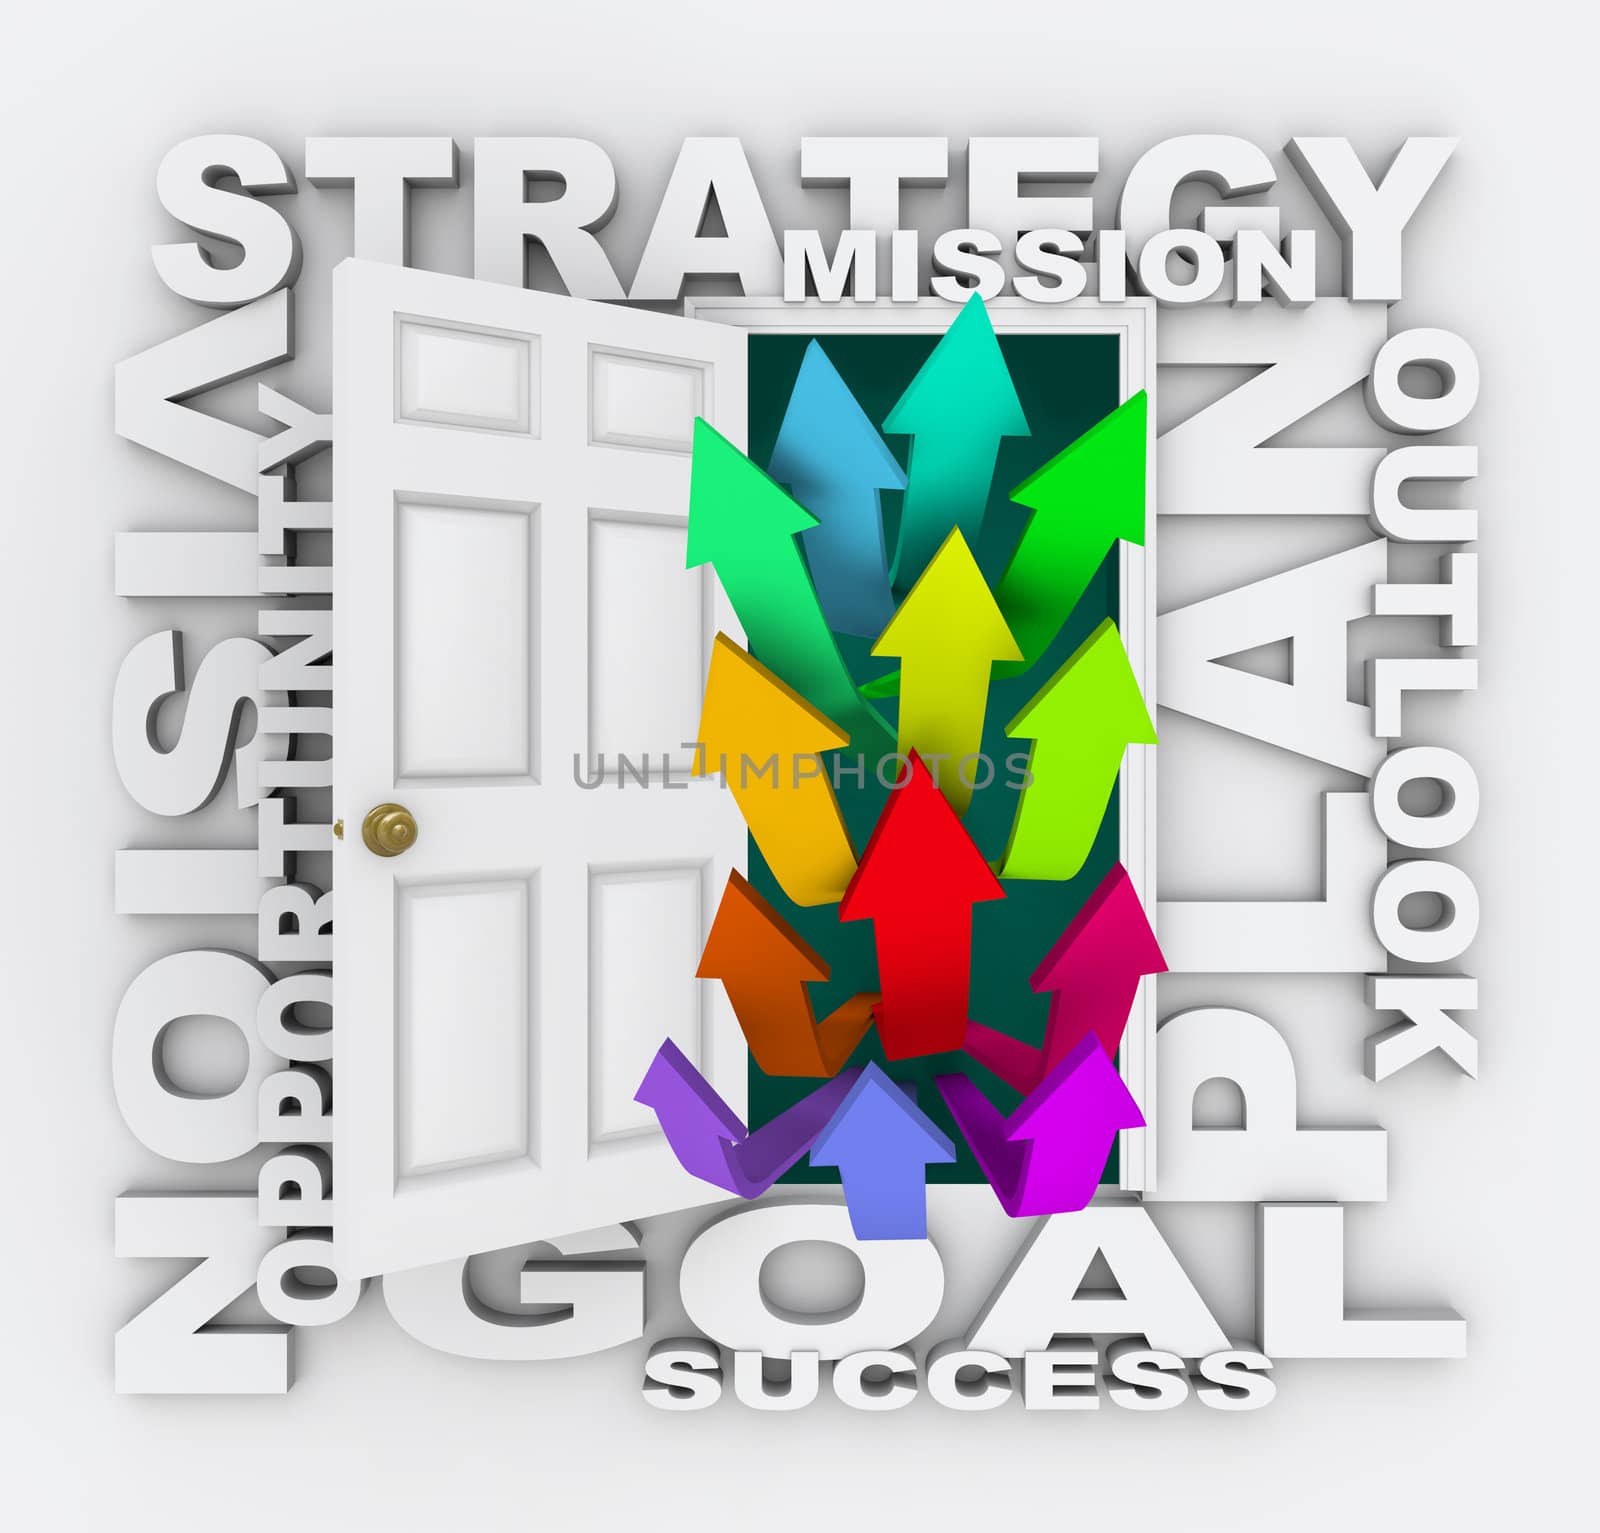 A door opening to show several arrows pointing upward, surrounded by words like plan, strategy, vision, outlook, opportunity and mission